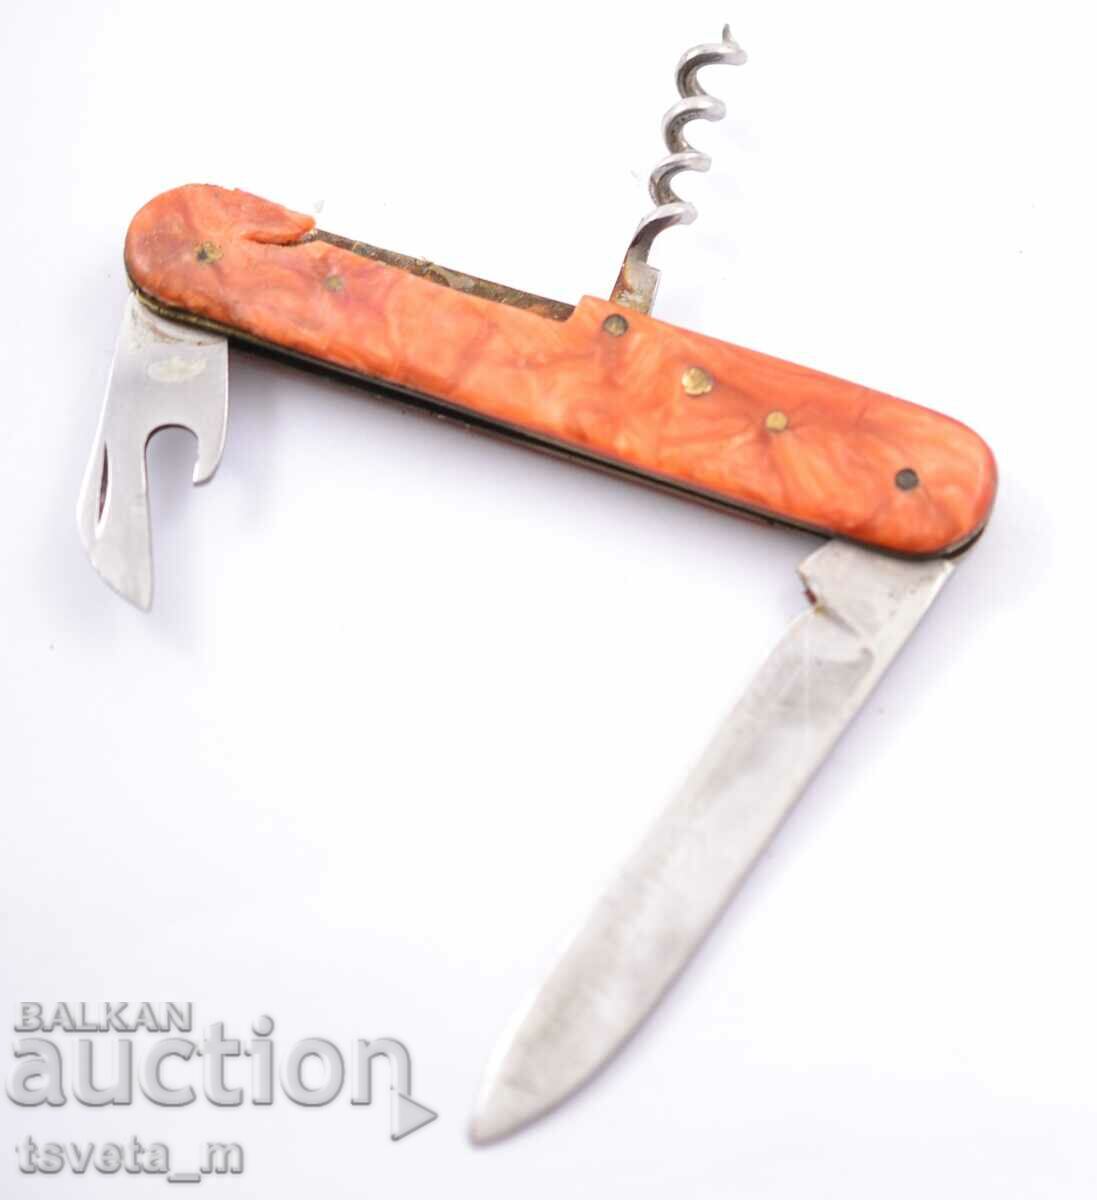 3-tool pocket knife - for repair or parts